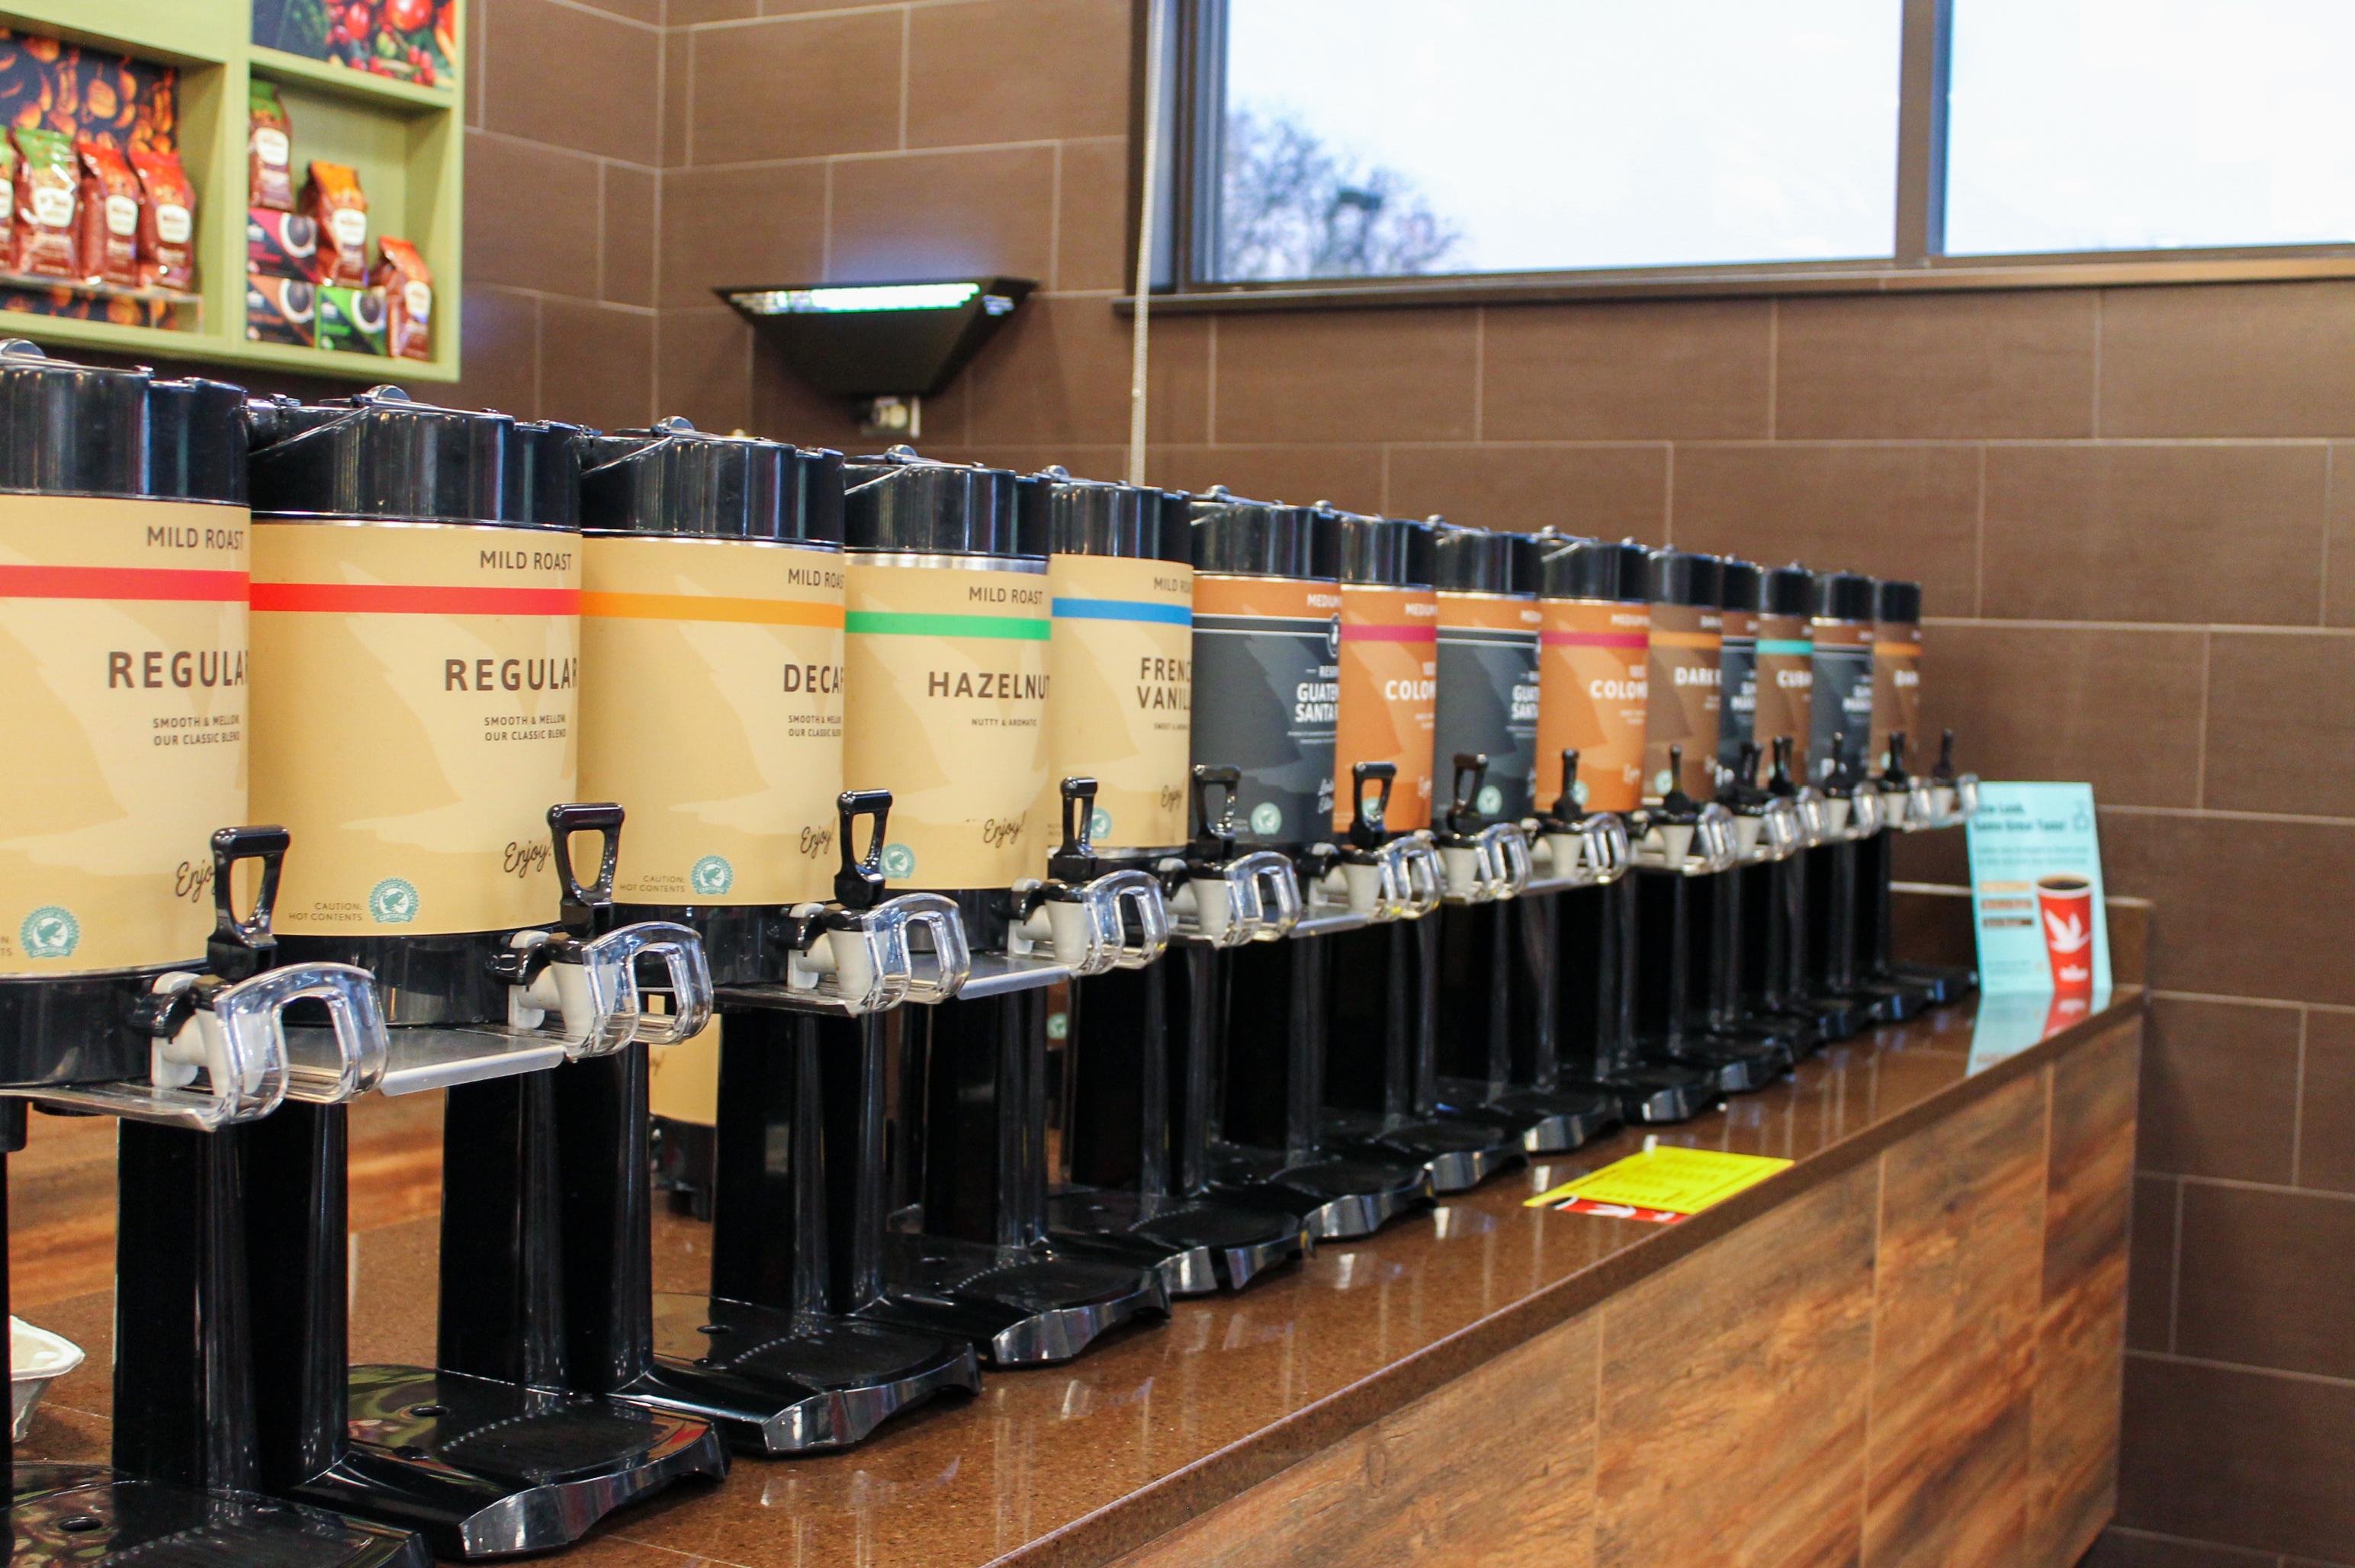 Wawa Introduces New Look for Coffee Pour Bar